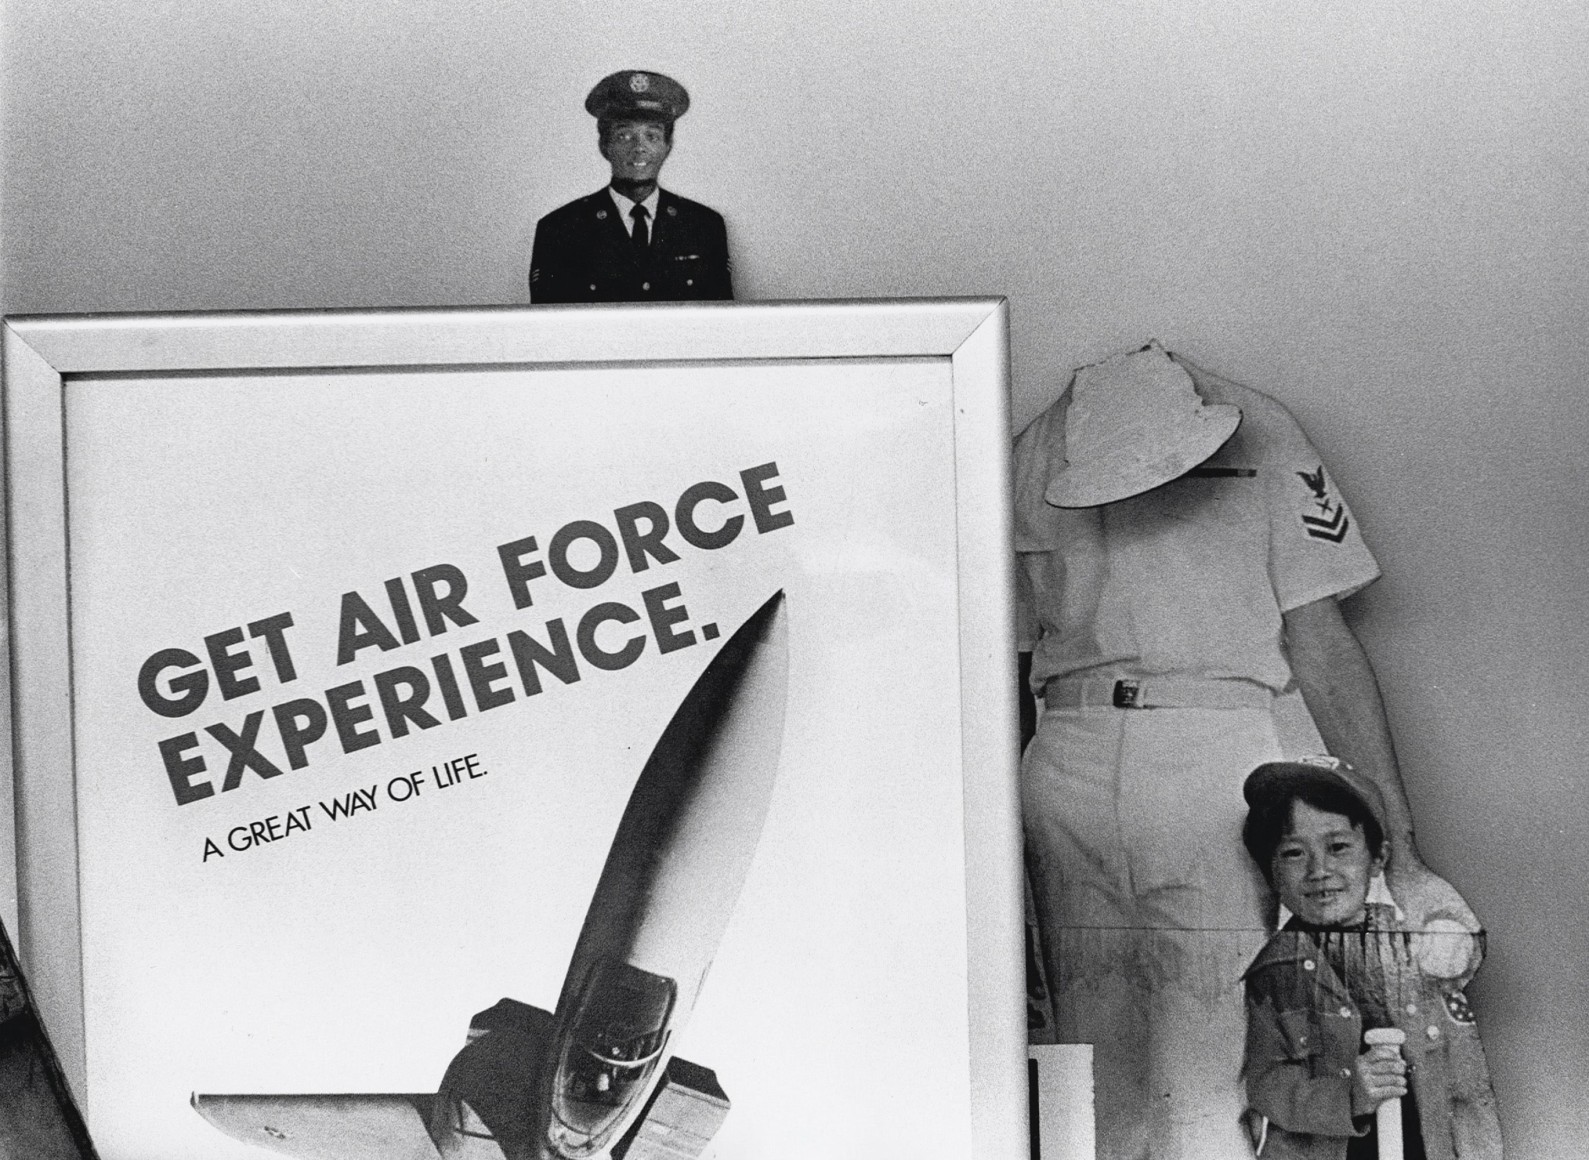 40. Beuford Smith, Get Air Force Experience, Harlem, ​1982. A sign that reads &quot;Get Air Force experience. A great way of life.&quot; in front of cardboard cutouts of men and a young boy.